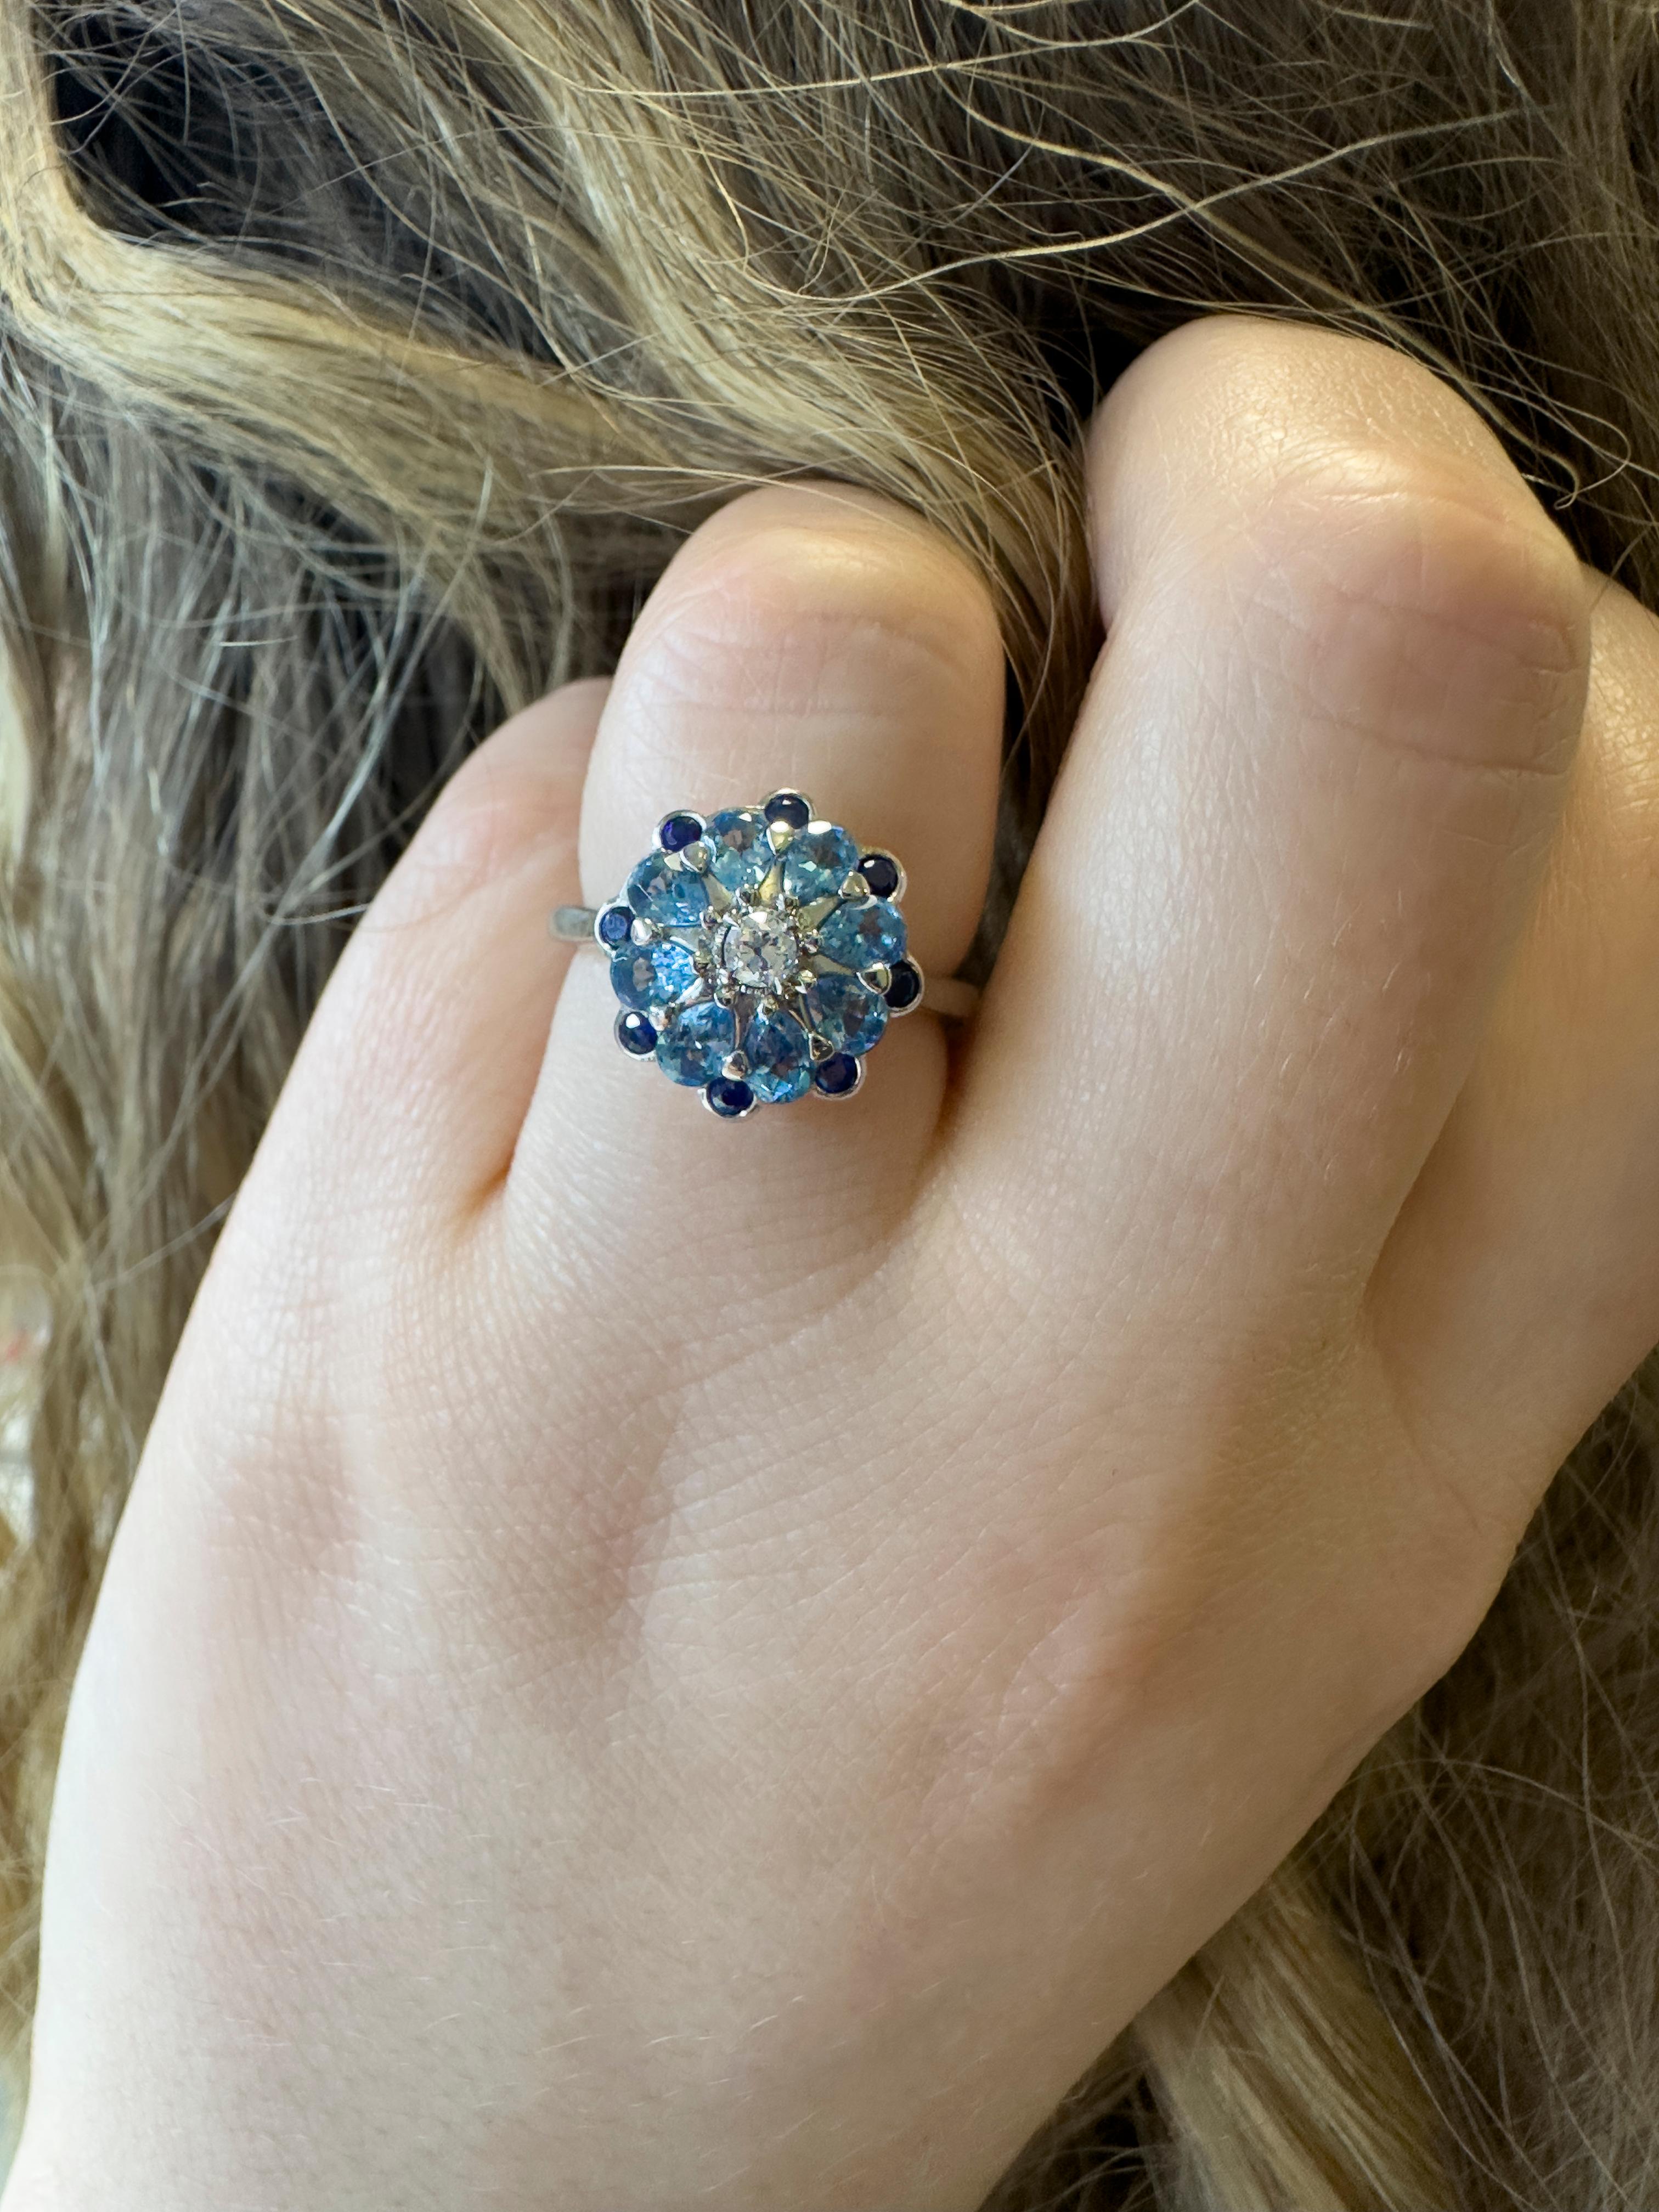 Featuring round sapphires, pear shaped aquamarines and a round old cut diamond in the centre, this pretty design has been given a modern touch by setting the gems in bright platinum. We love the combination of beautiful blues which mean this ring